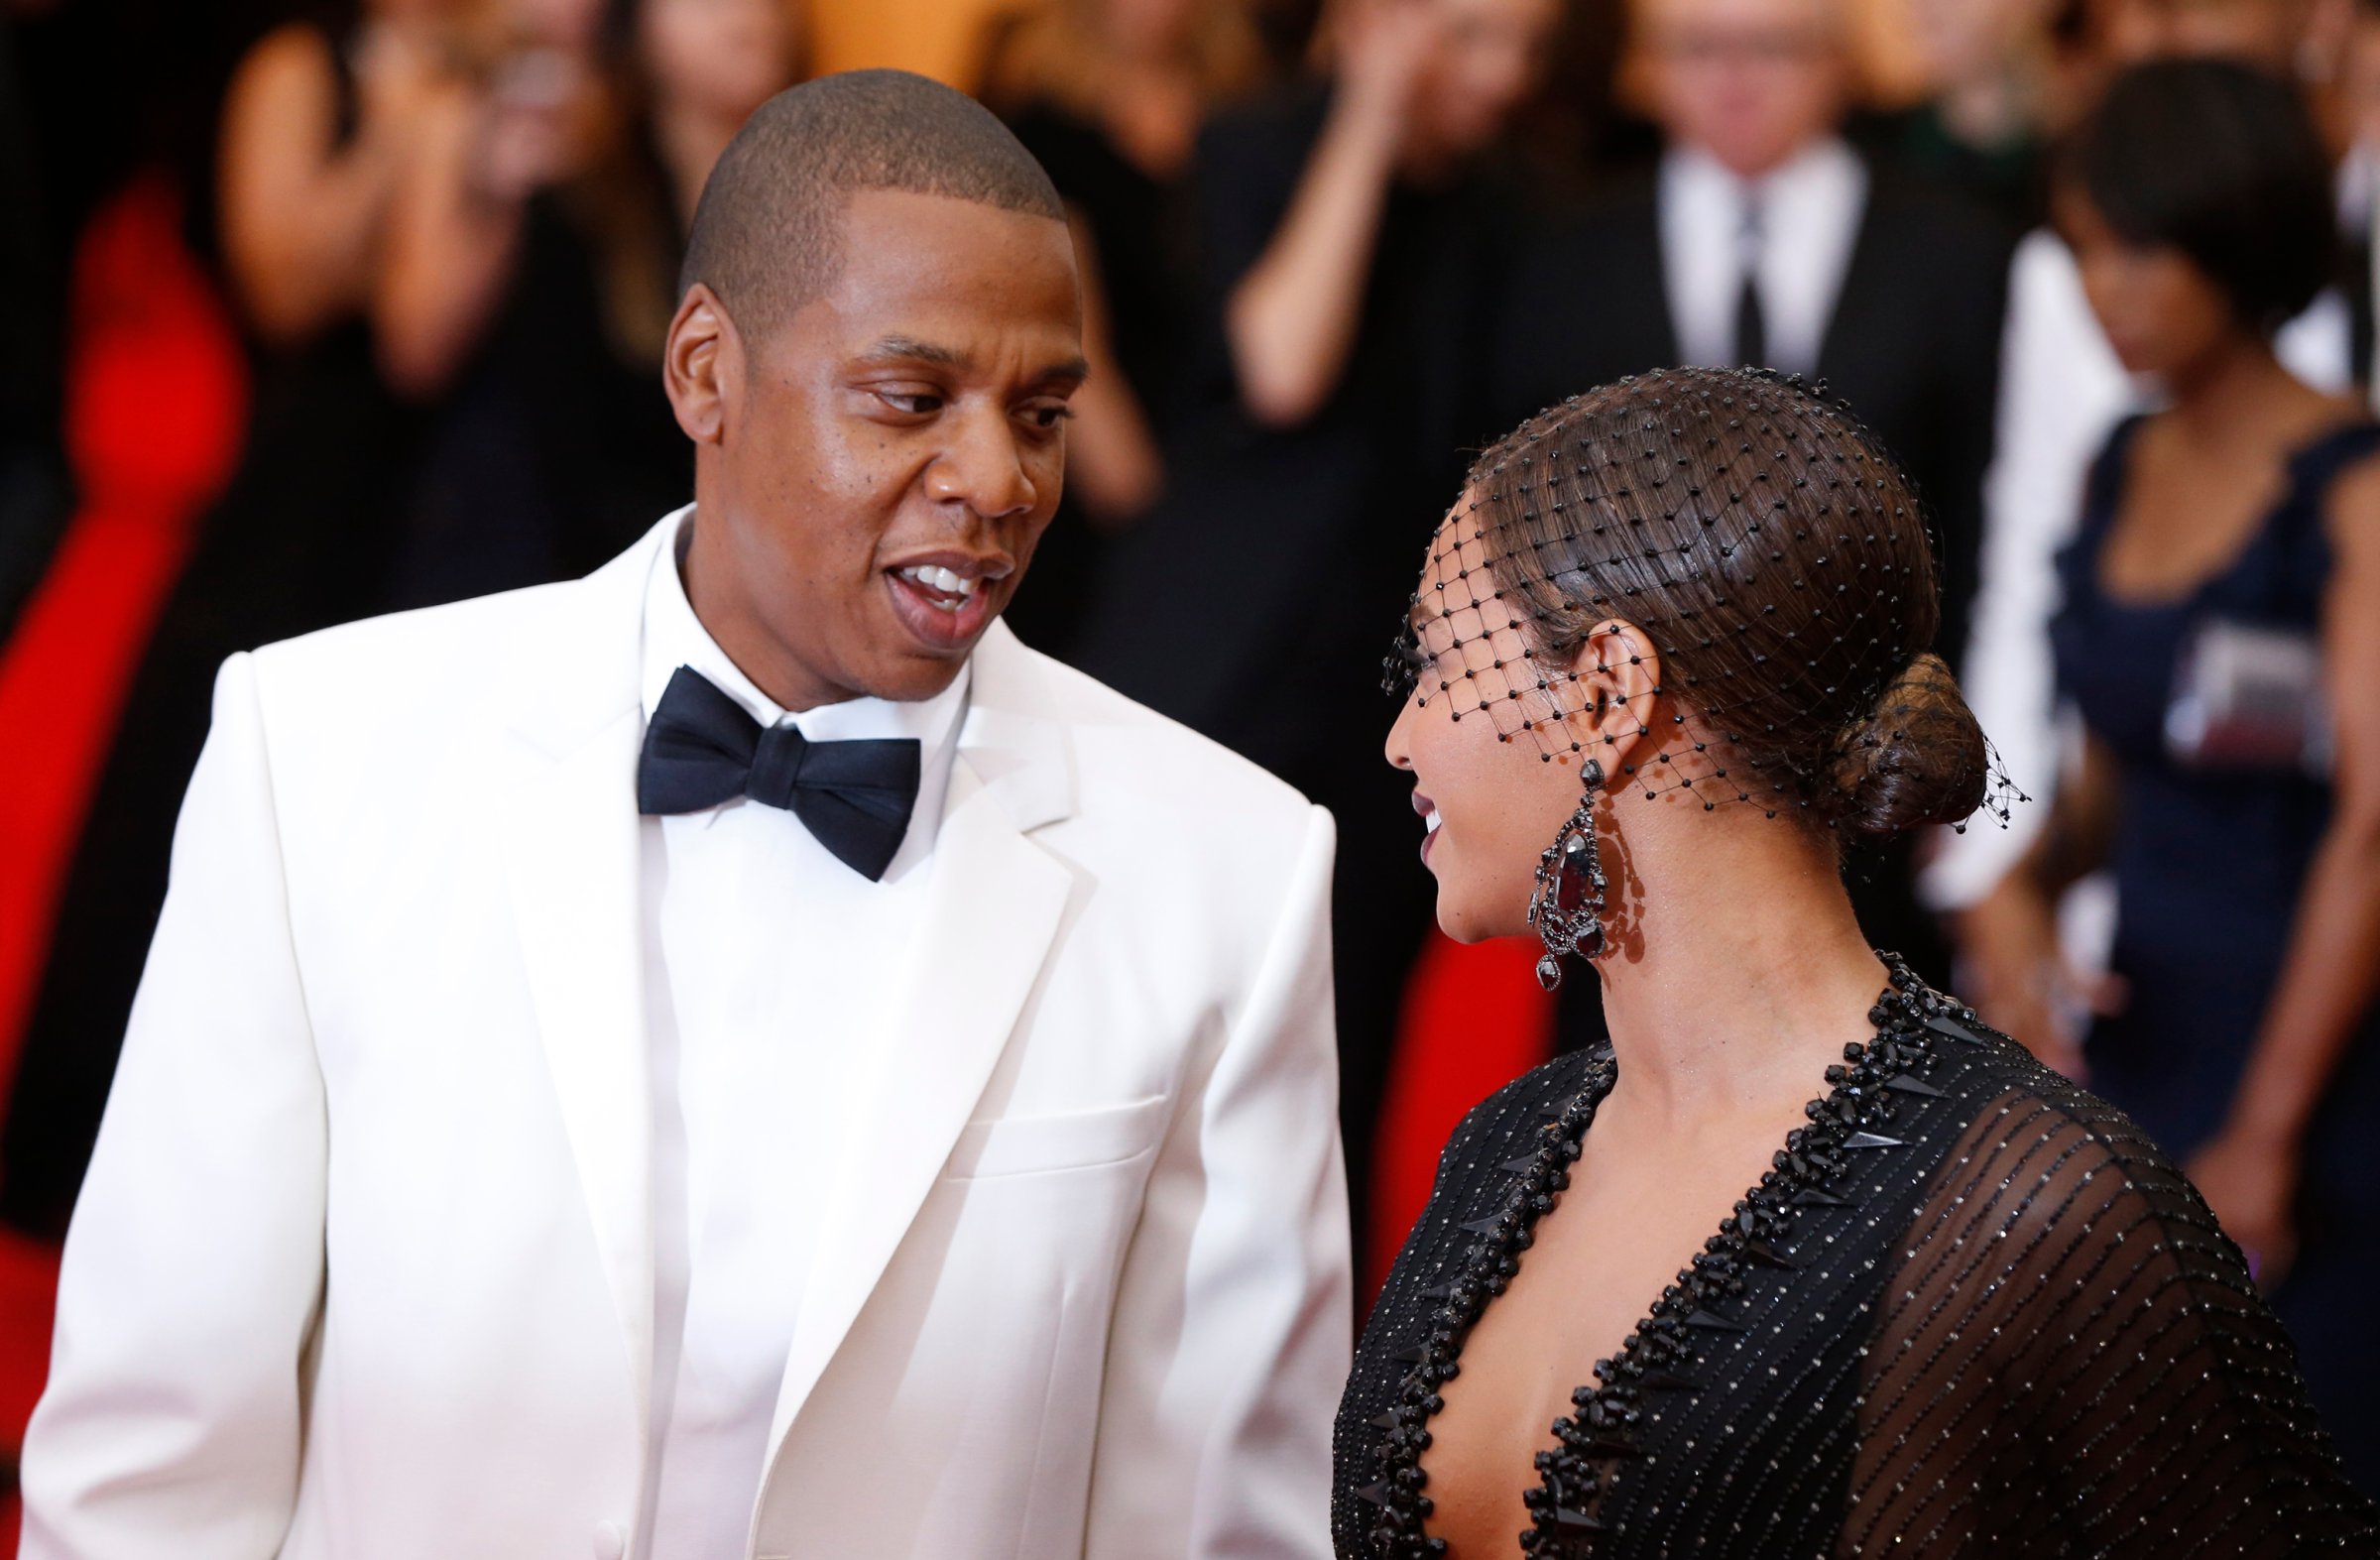 Jay Z and Beyonce Knowles arrive at the Metropolitan Museum of Art Costume Institute Gala Benefit.